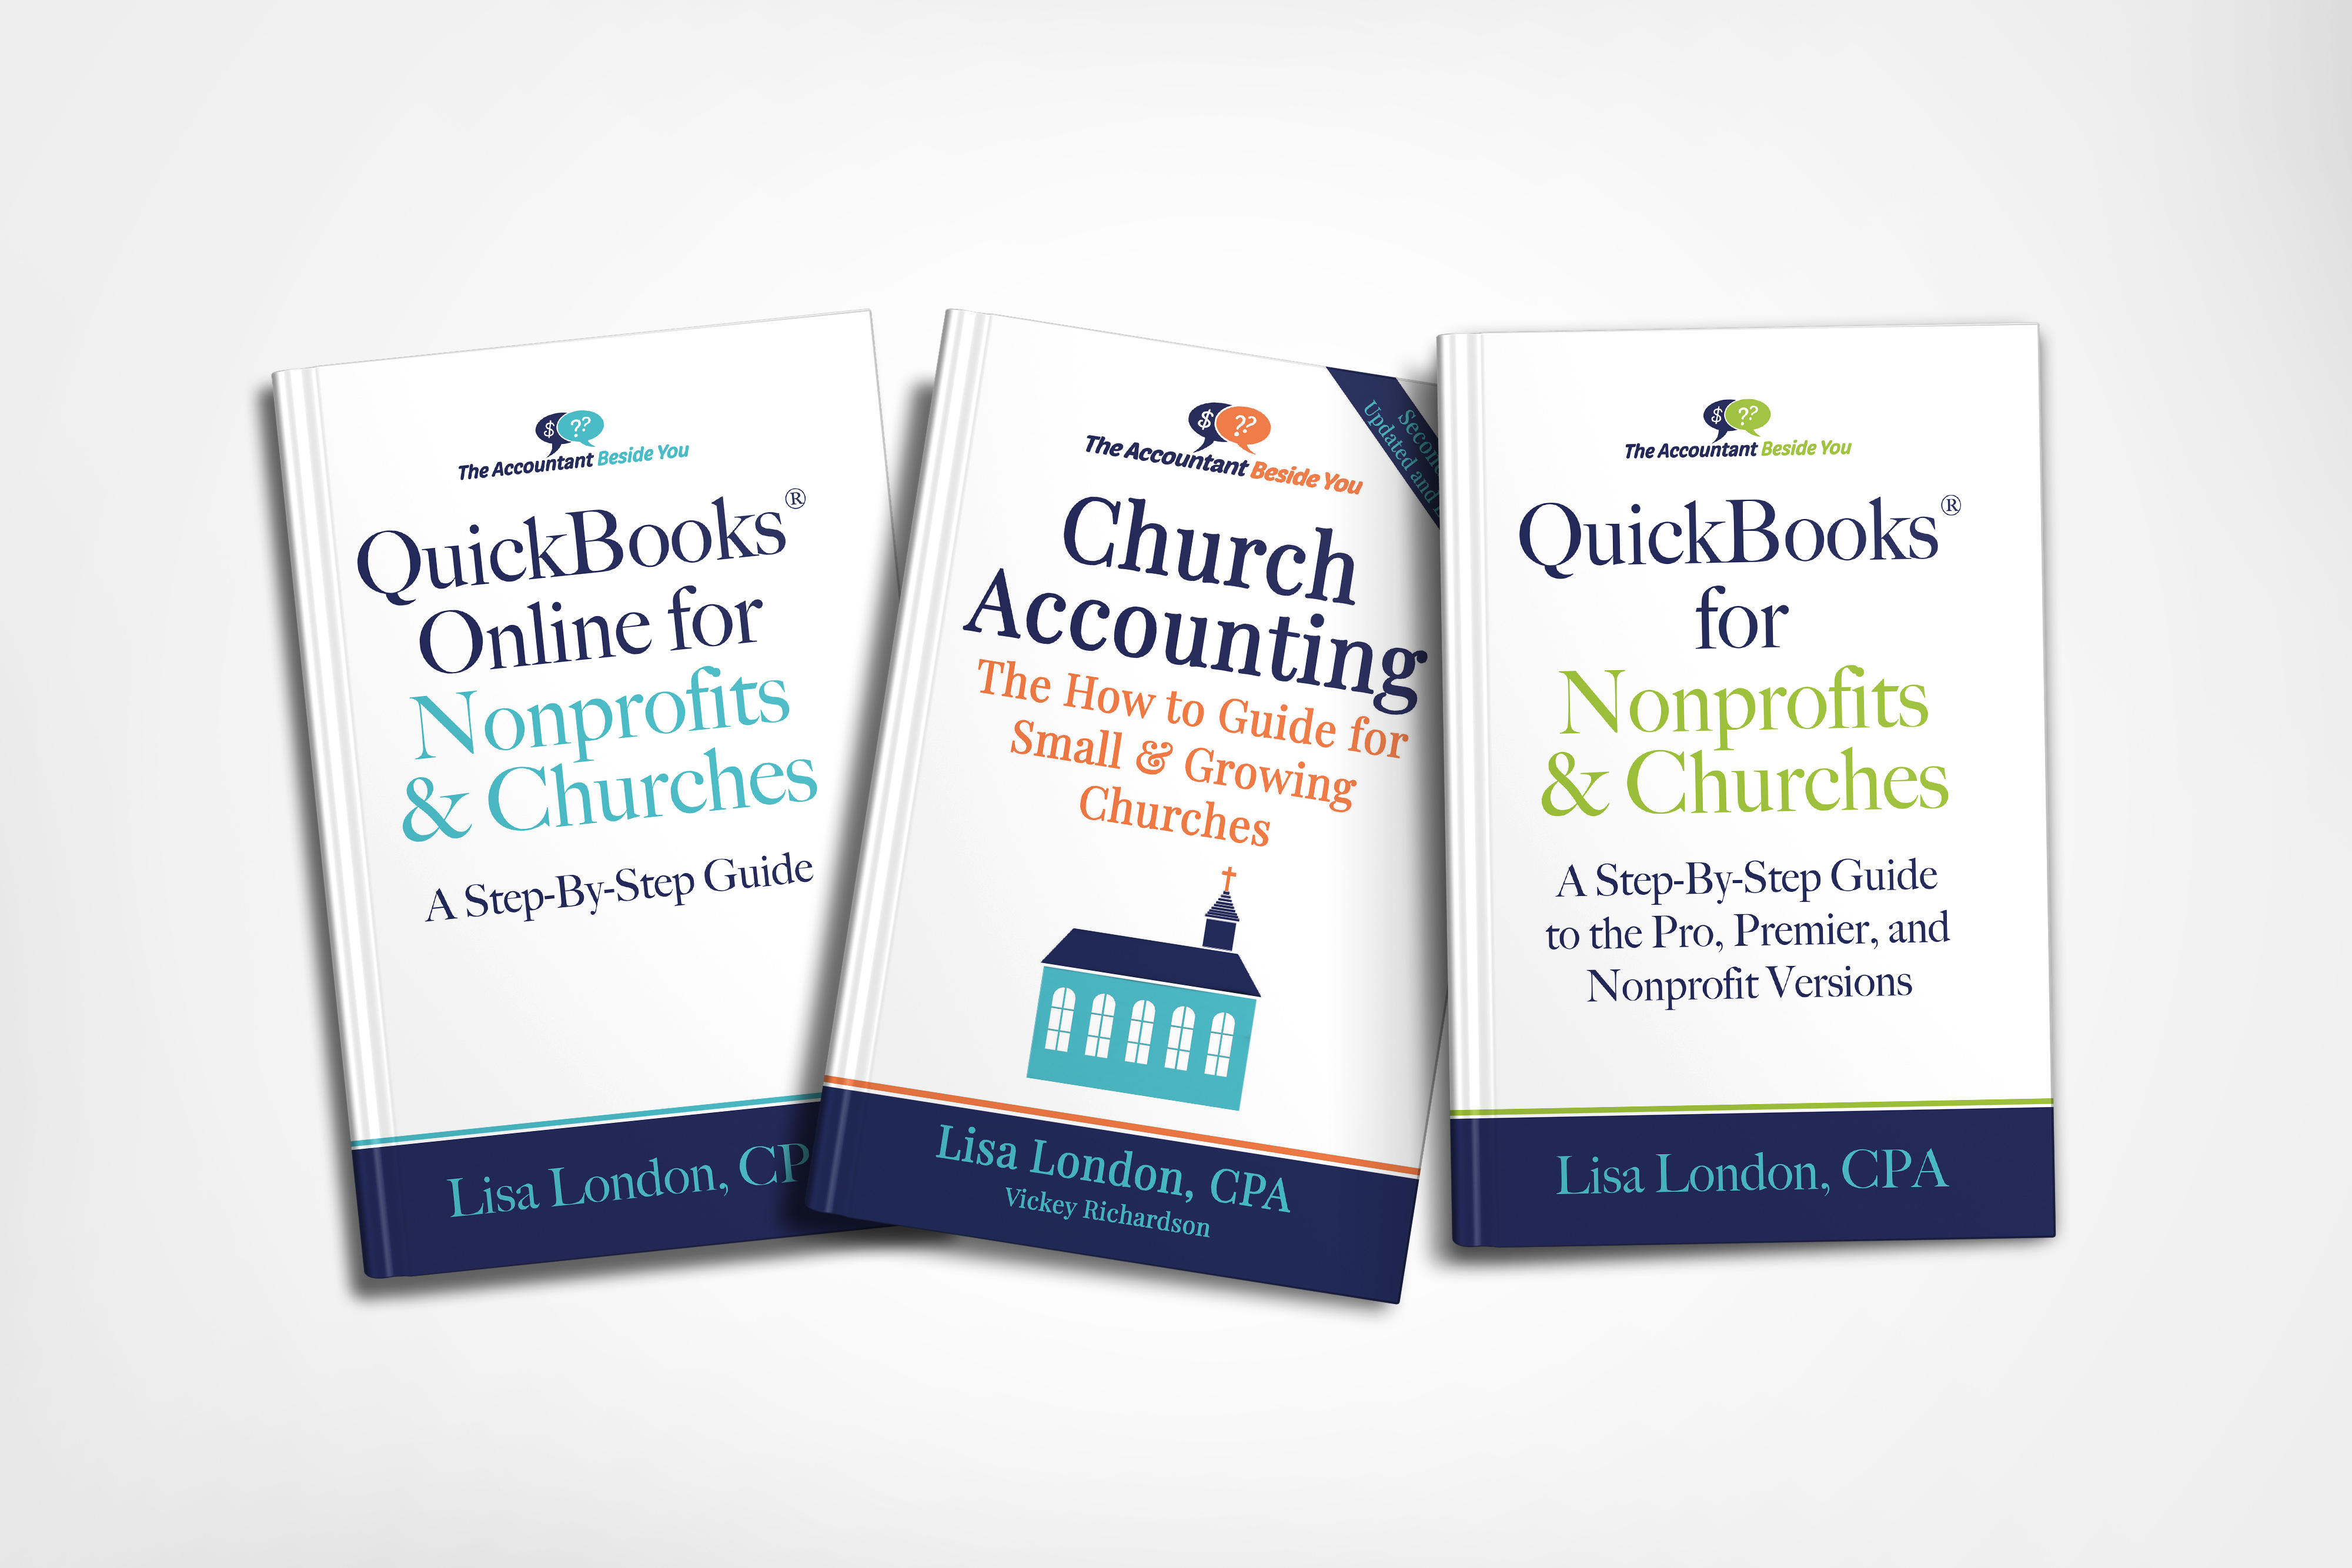 How To Guide for Small and Growing Churches